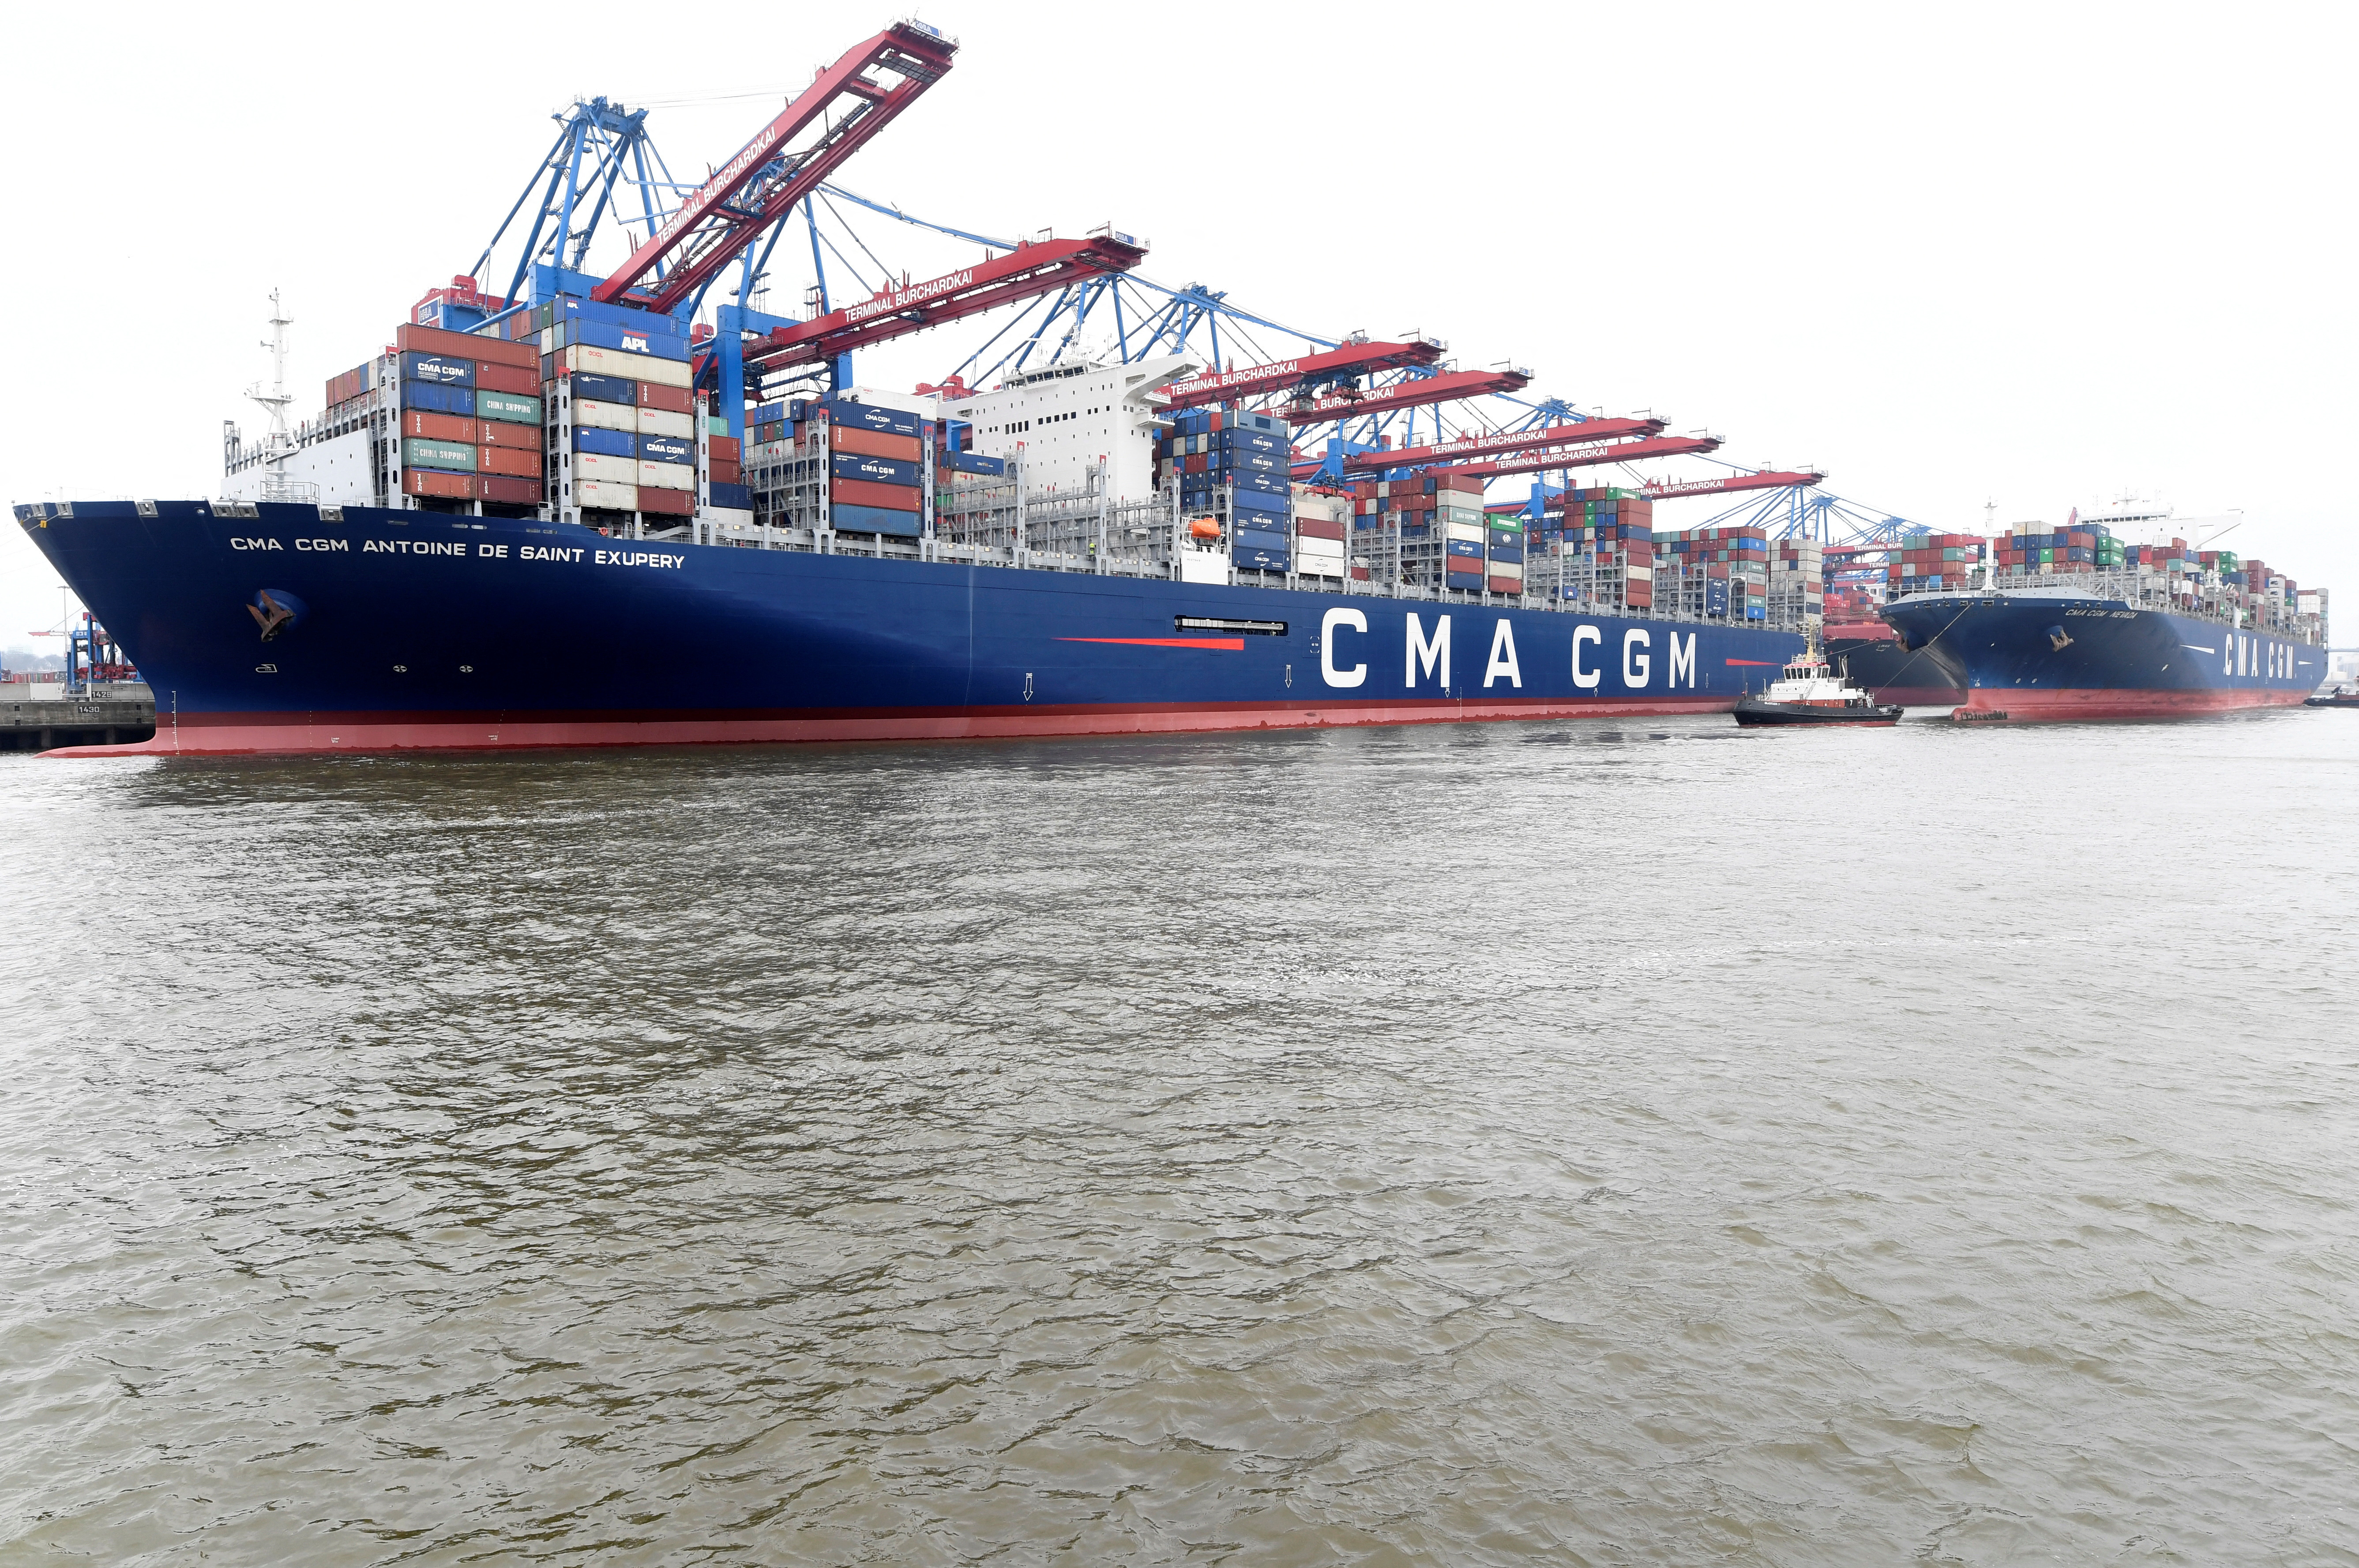 Container ships CMA CGM Antoine de Saint Exupery and CMA CGM Nevada are moored at the loading terminal in the port of Hamburg